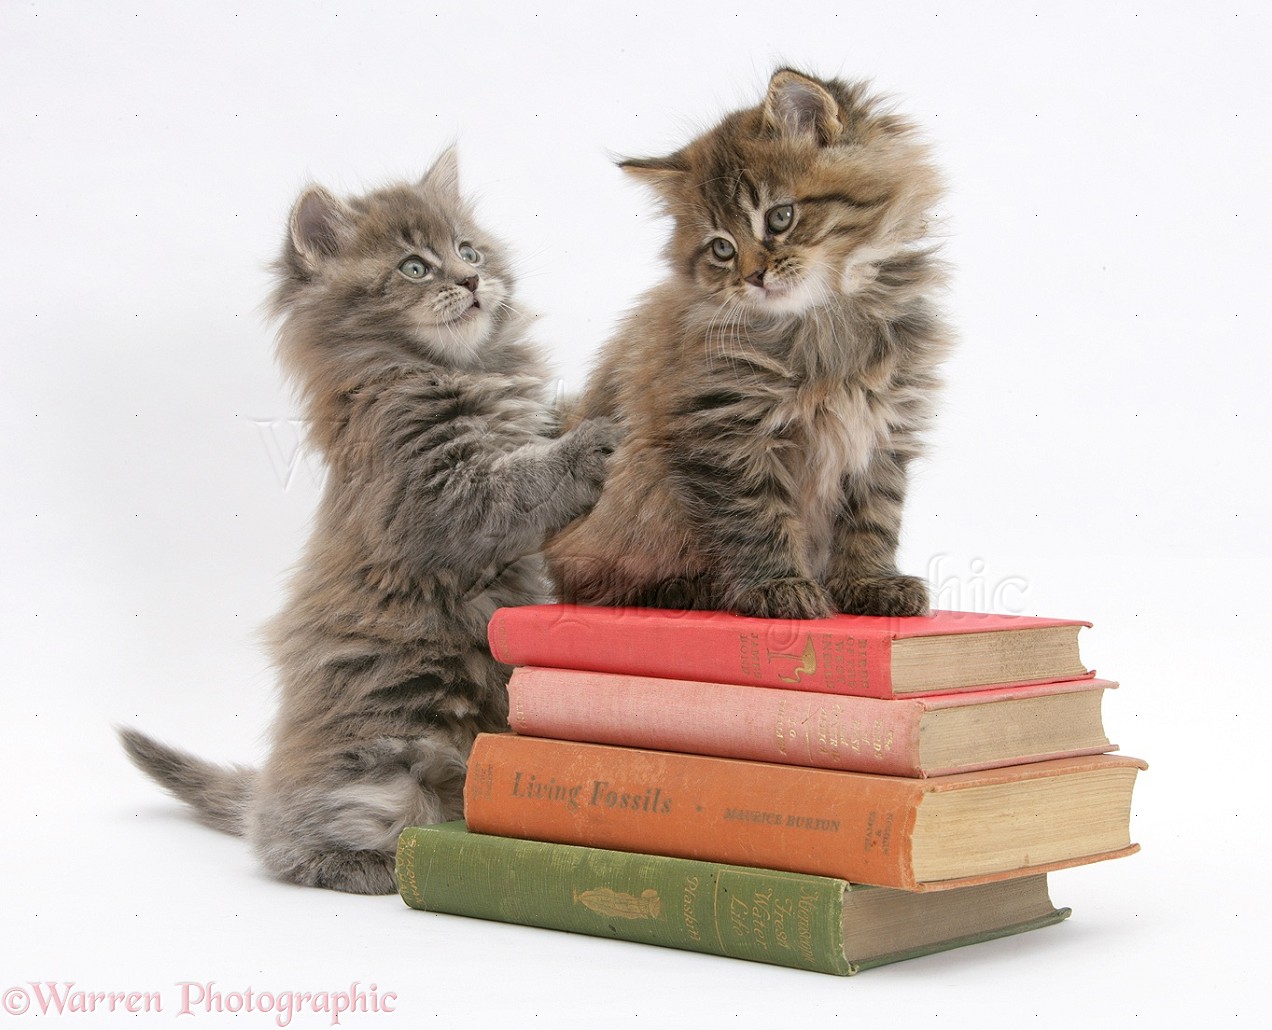 18529-maine-coon-kittens-playing-on-a-stack-of-books-white-background.jpg